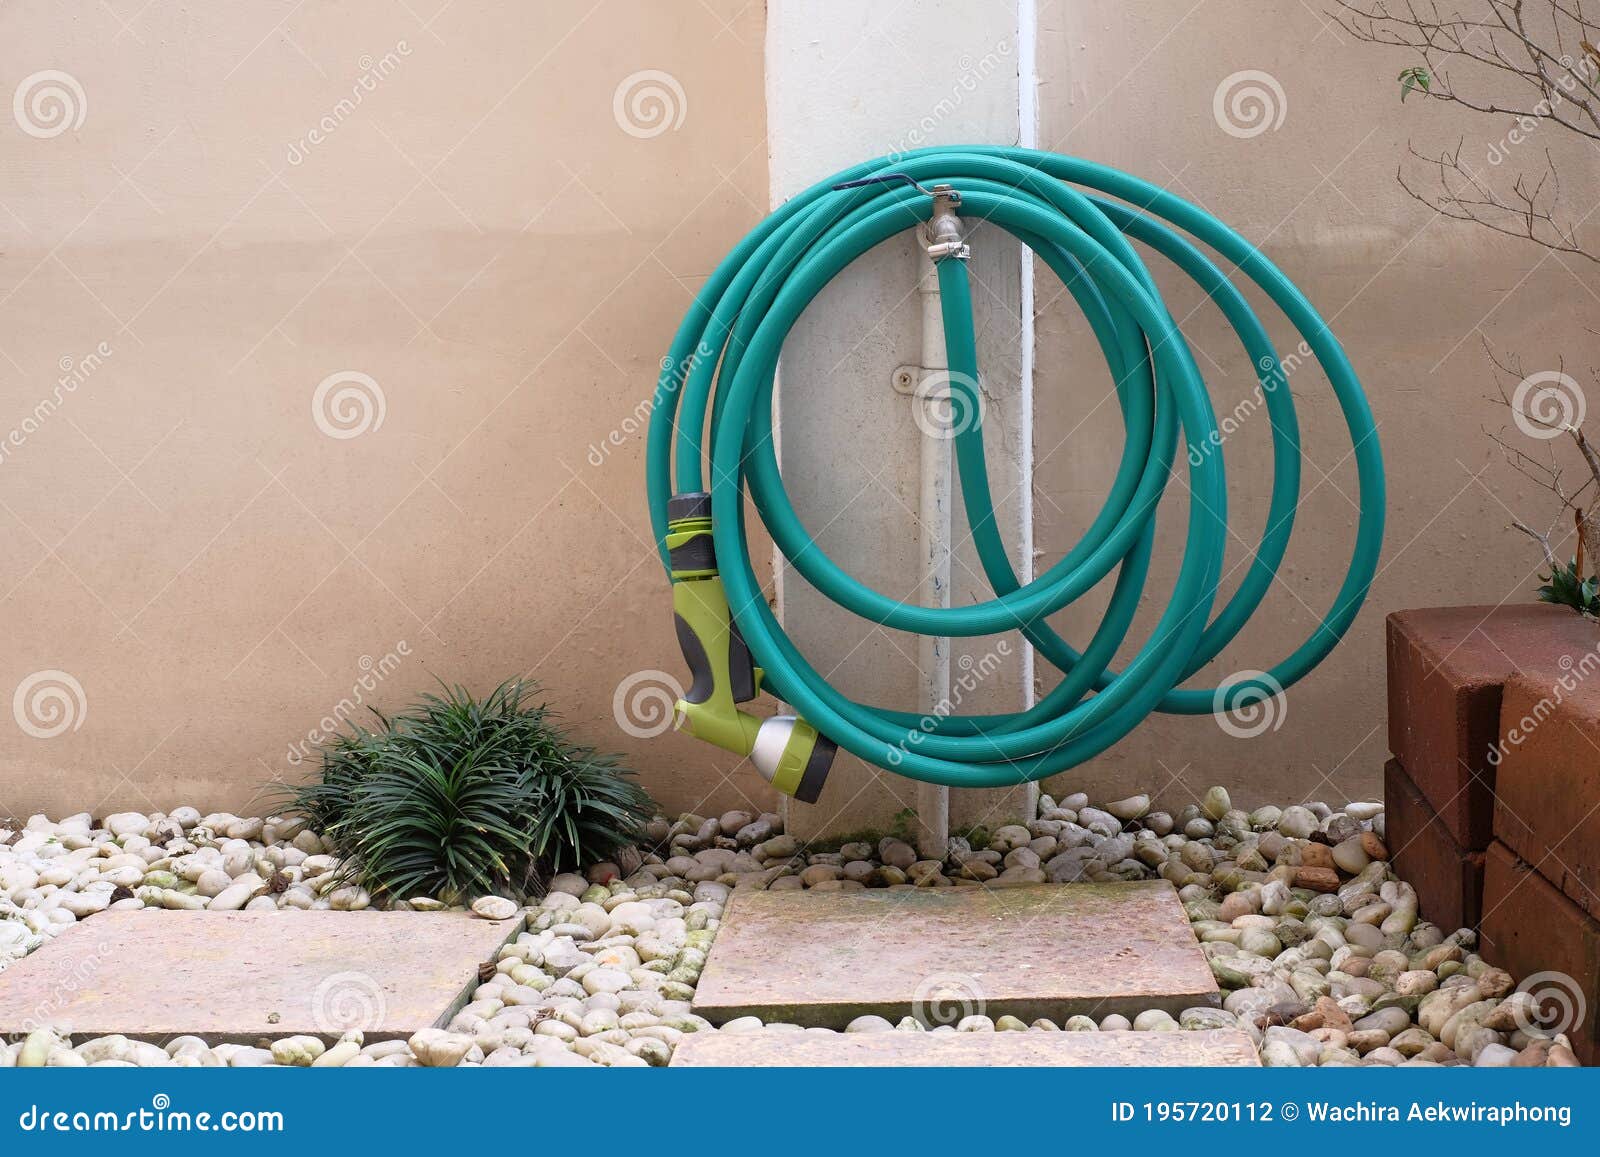 646 Hanging Hose Photos Free Royalty Free Stock Photos From Dreamstime